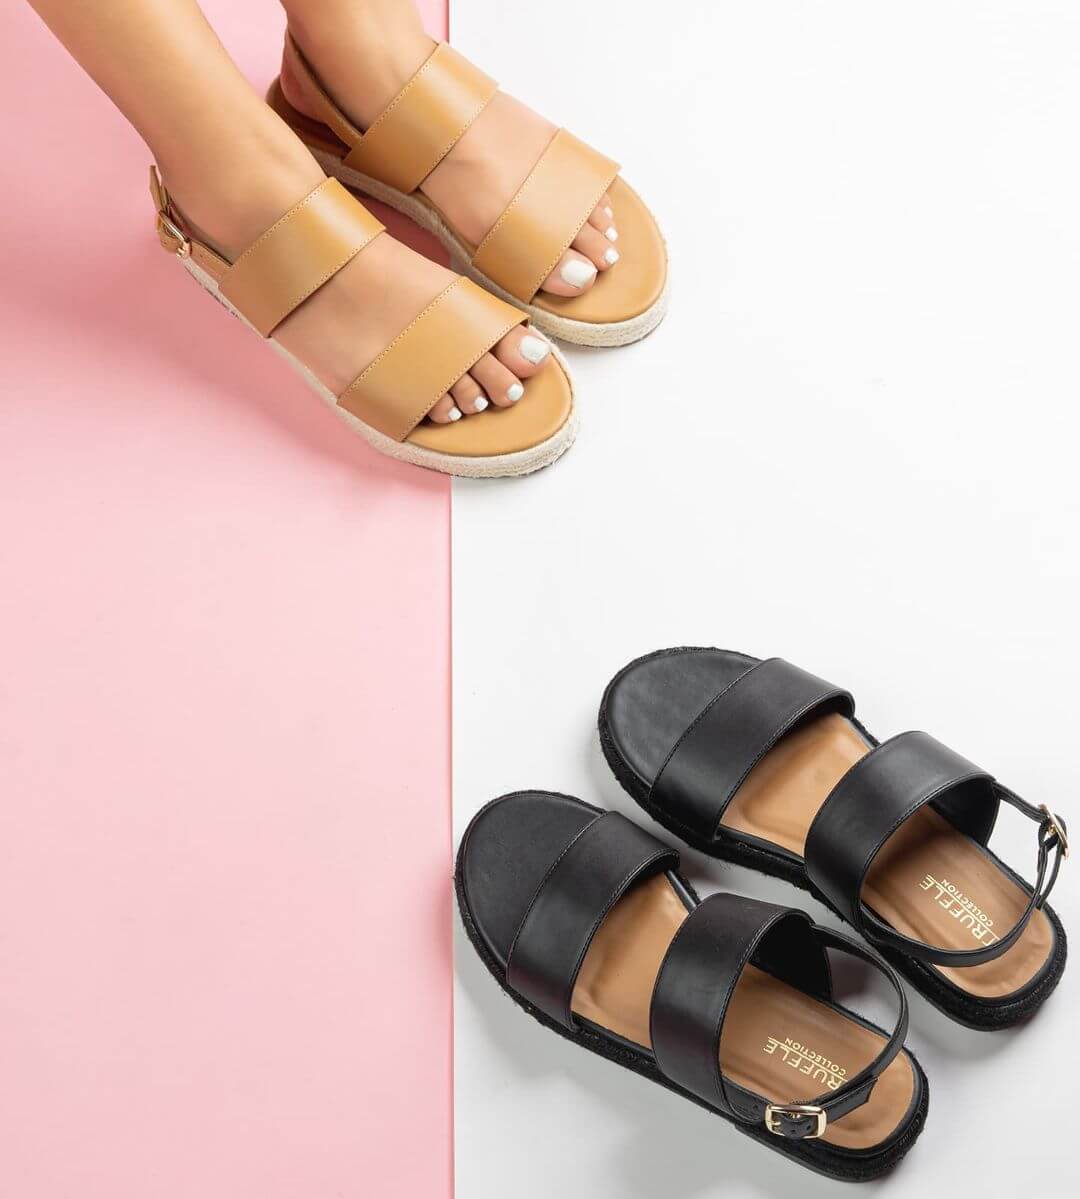 Women's Shoe Trends For Spring Season SANDALS For The Free Spirited